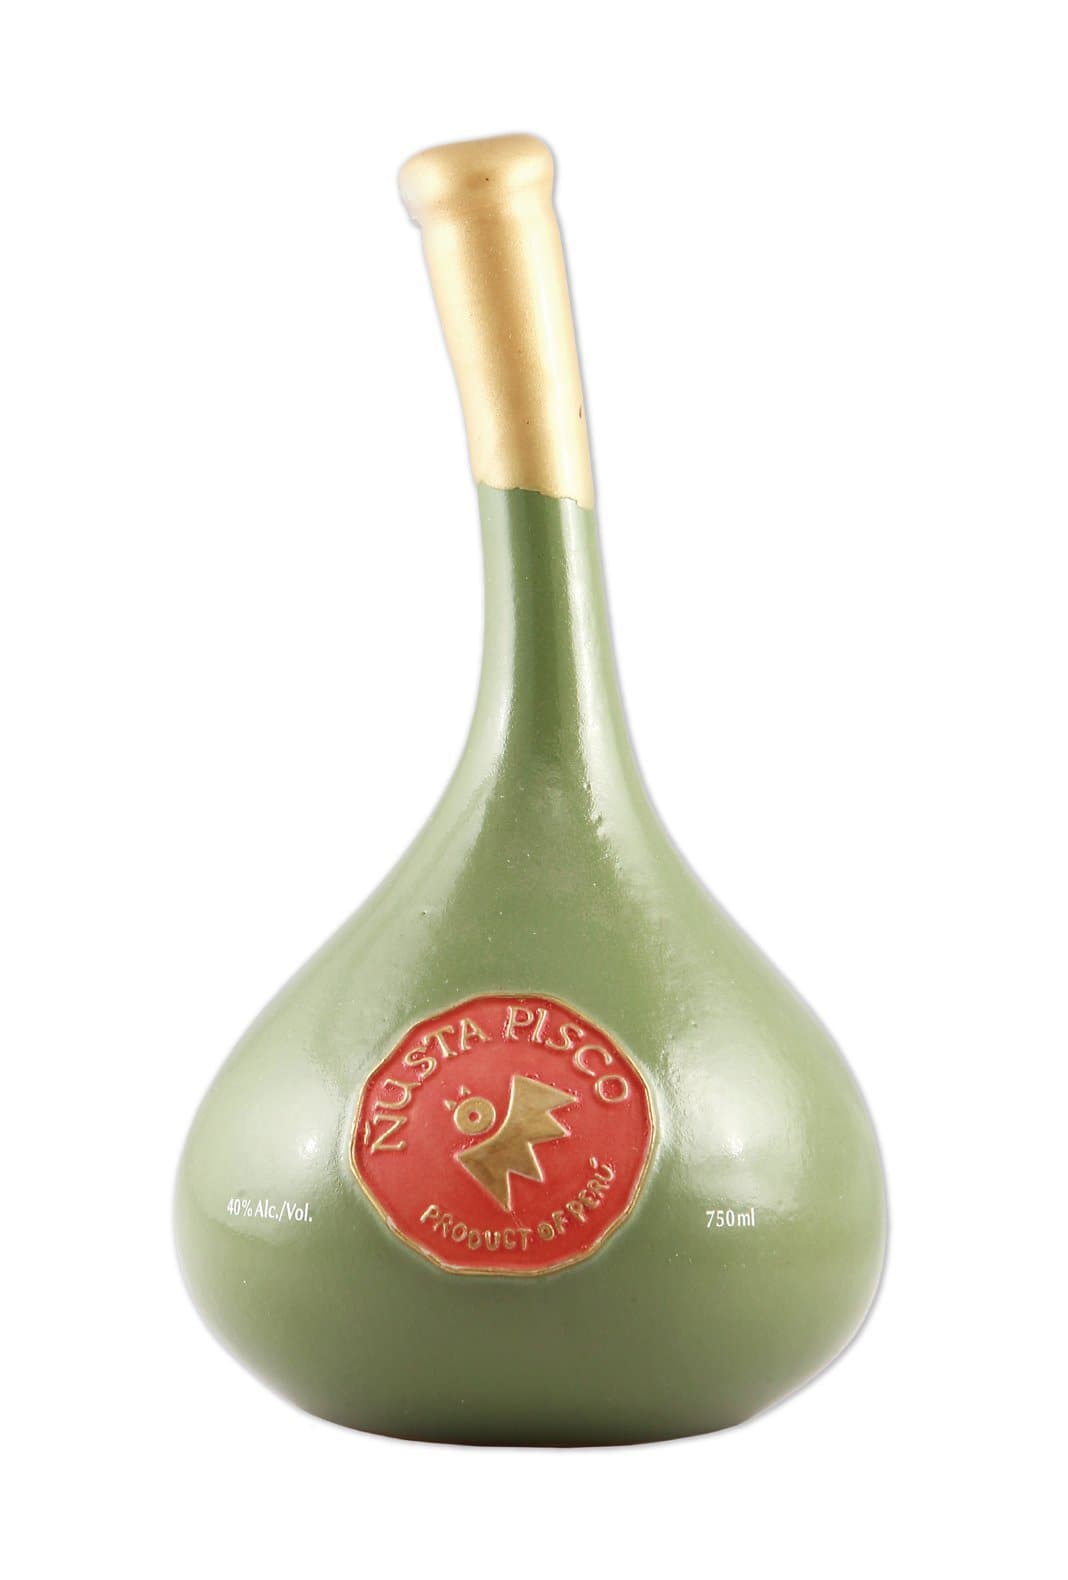 Nusta by Macchu Pisco 3 Years 40% 750ml | Alcoholic Beverages | Shop online at Spirits of France